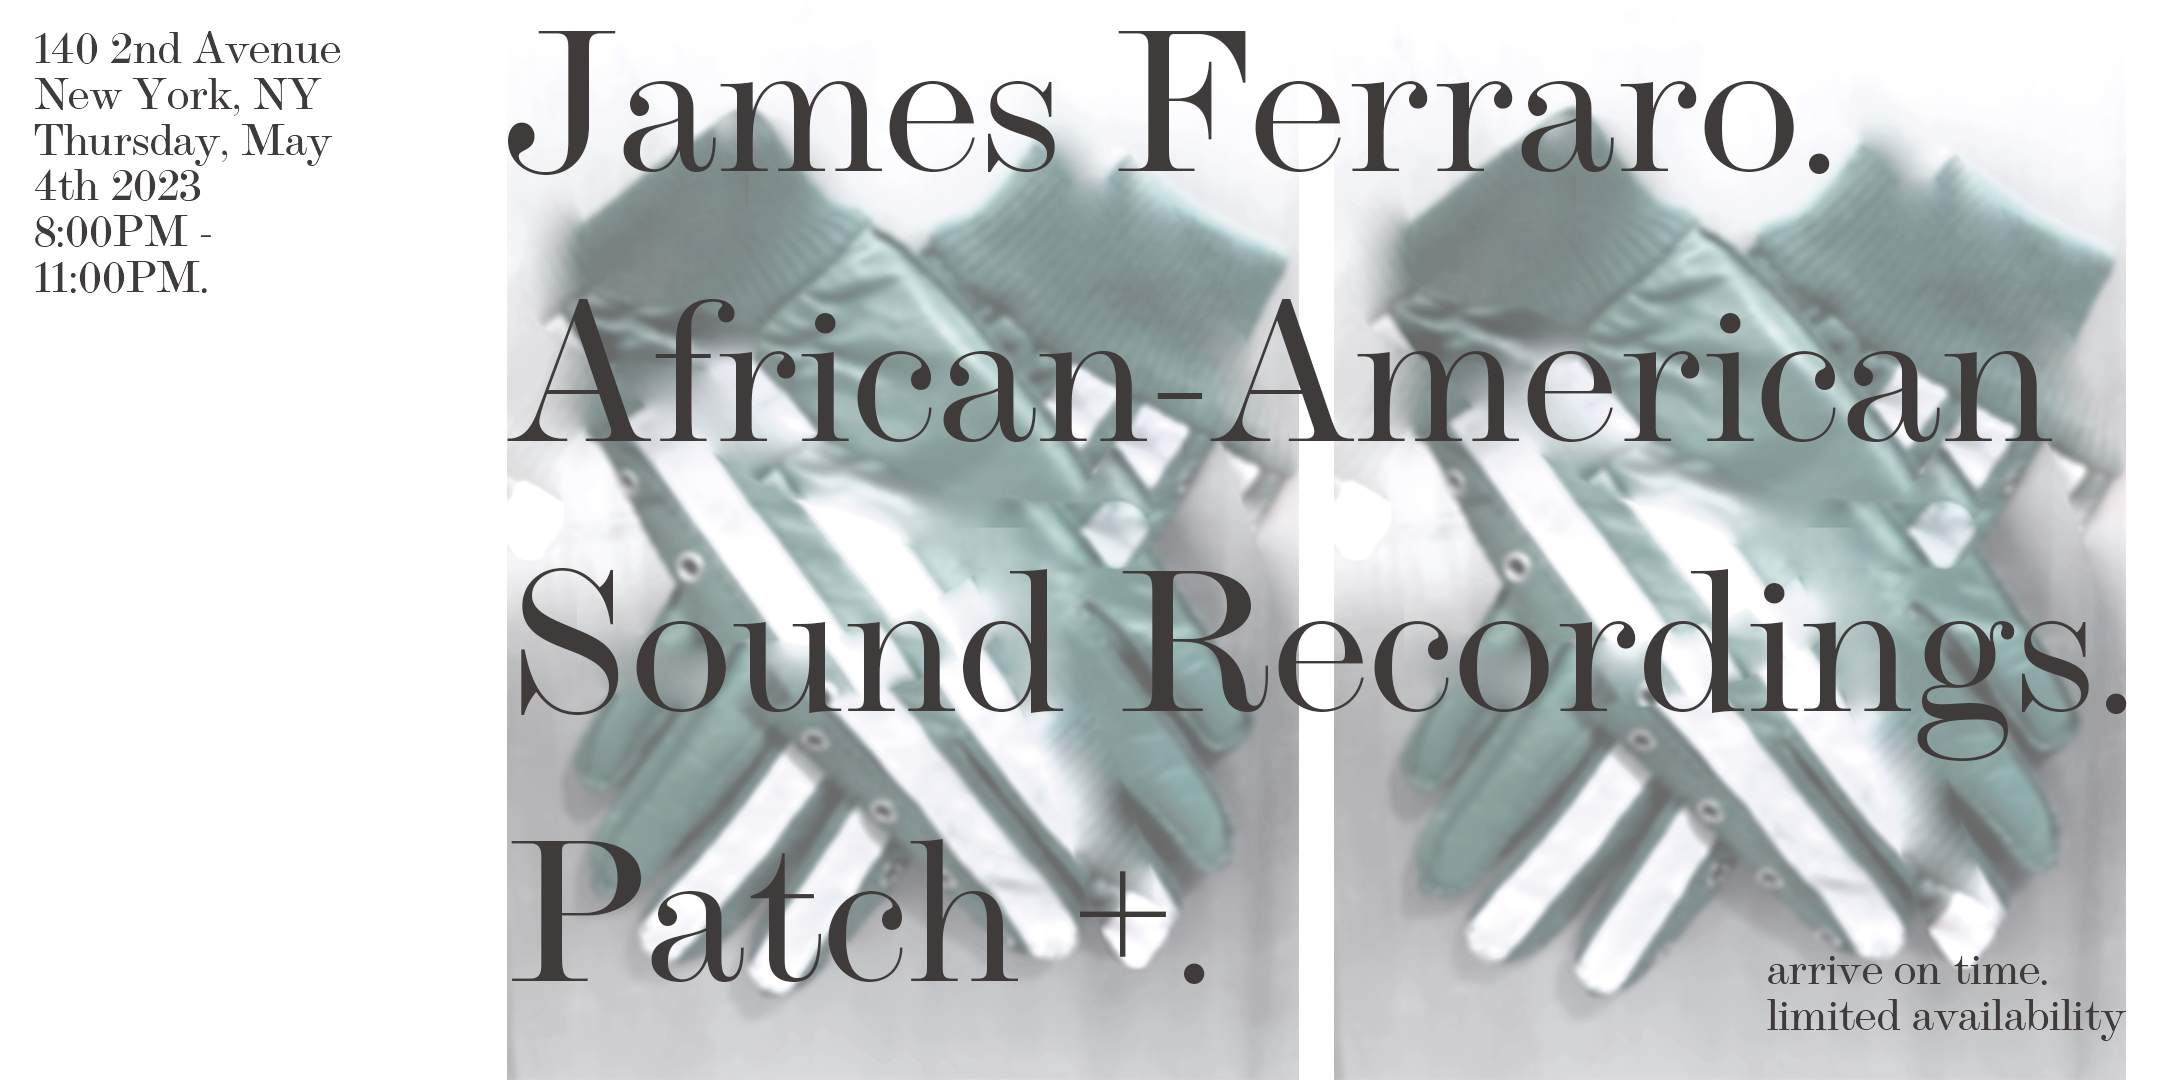 Free Advice presents: James Ferraro with African-American Sound Recordings & Patch - フライヤー裏